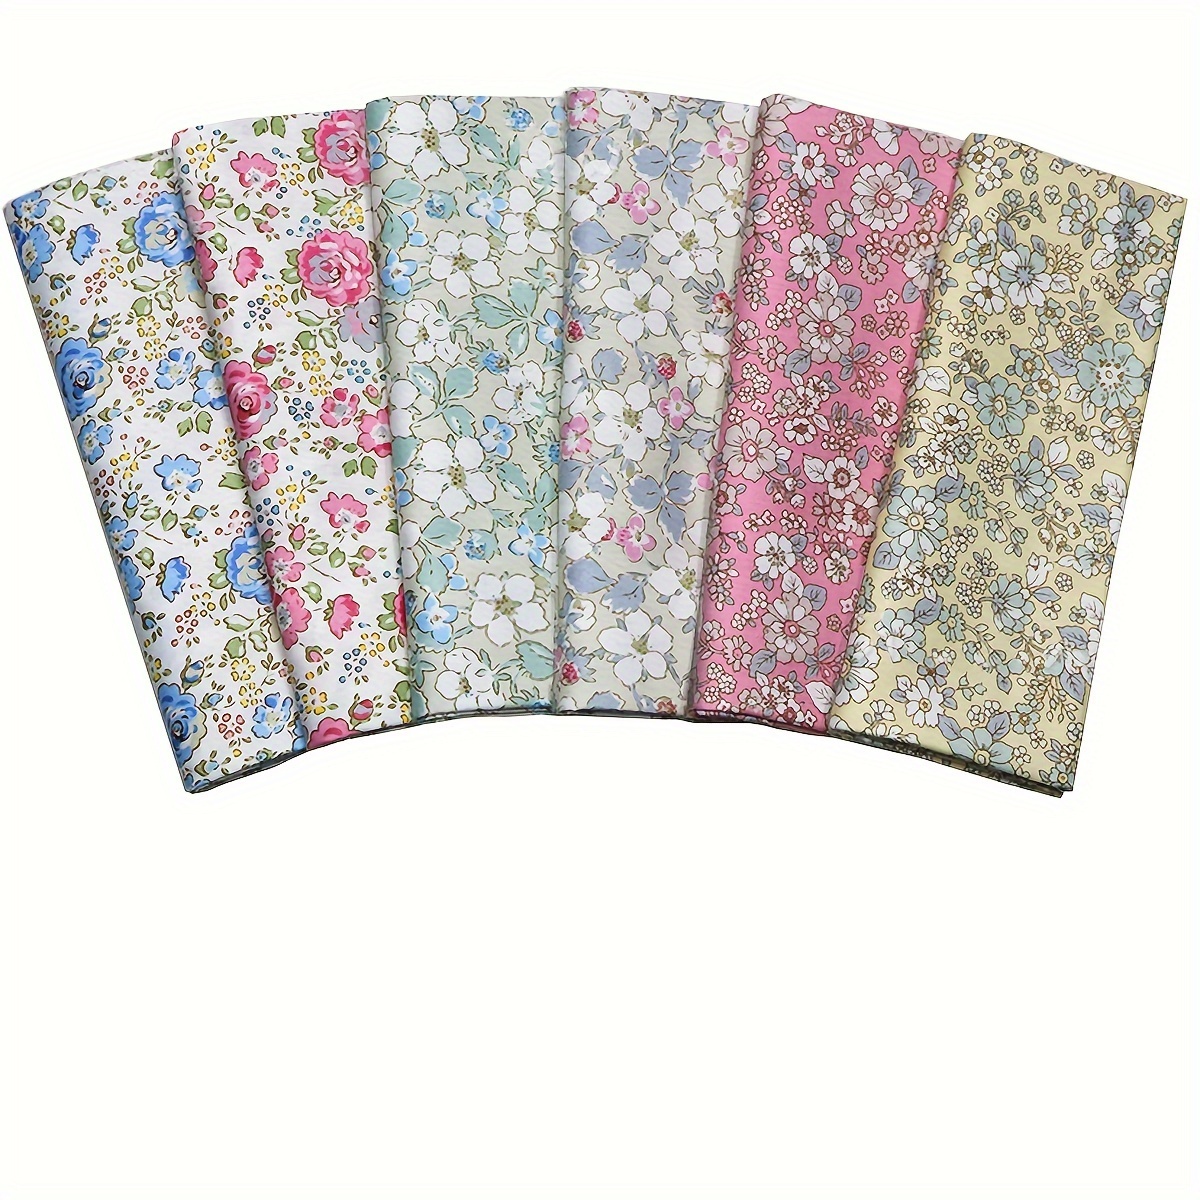 

6-piece Floral Cotton Fabric Squares, 18" X 22" Pre-cut Quilting & Patchwork Materials For Diy Scrapbooking And Crafts